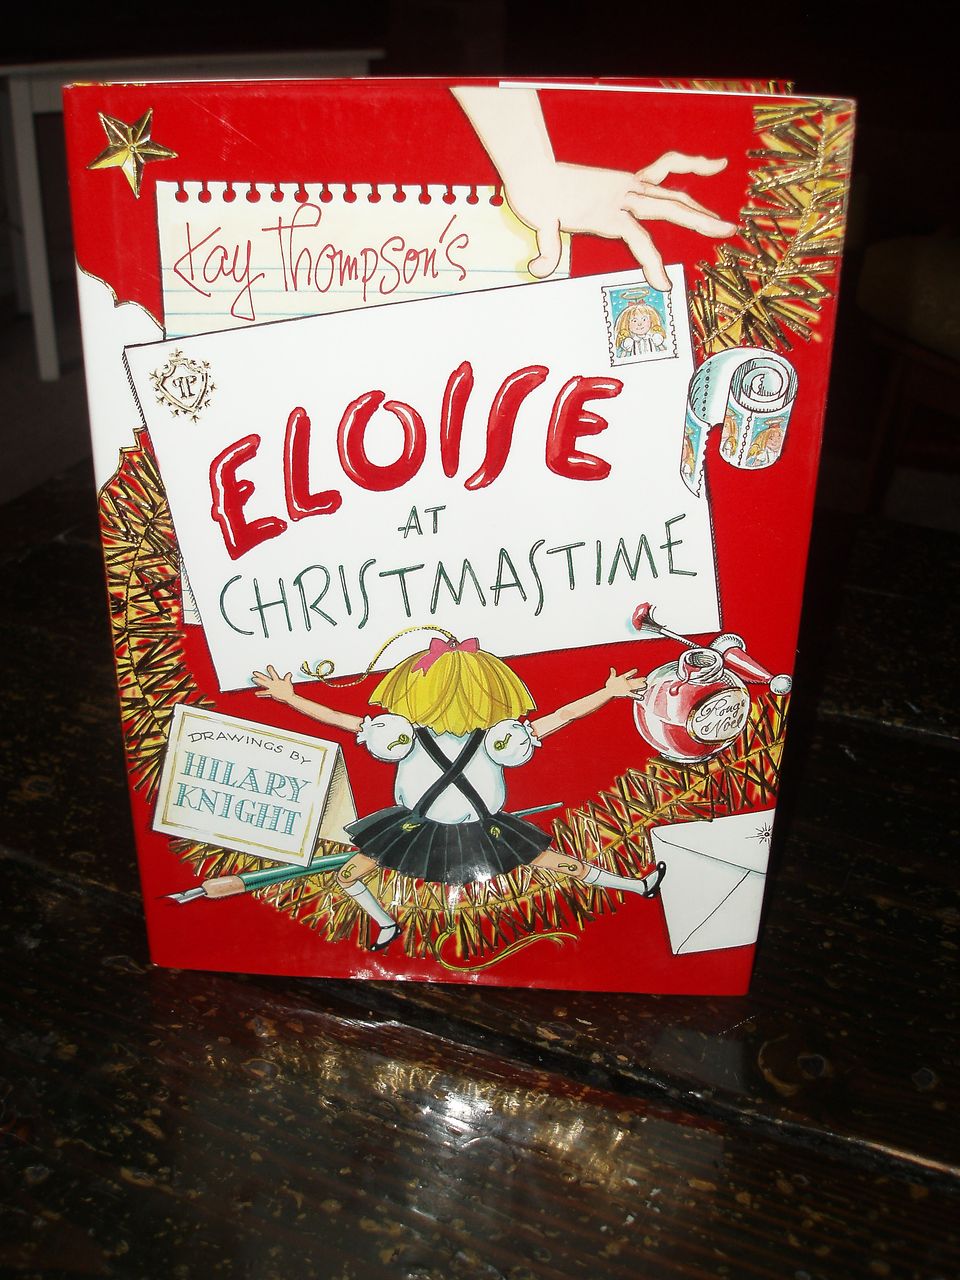 eloise at christmastime book